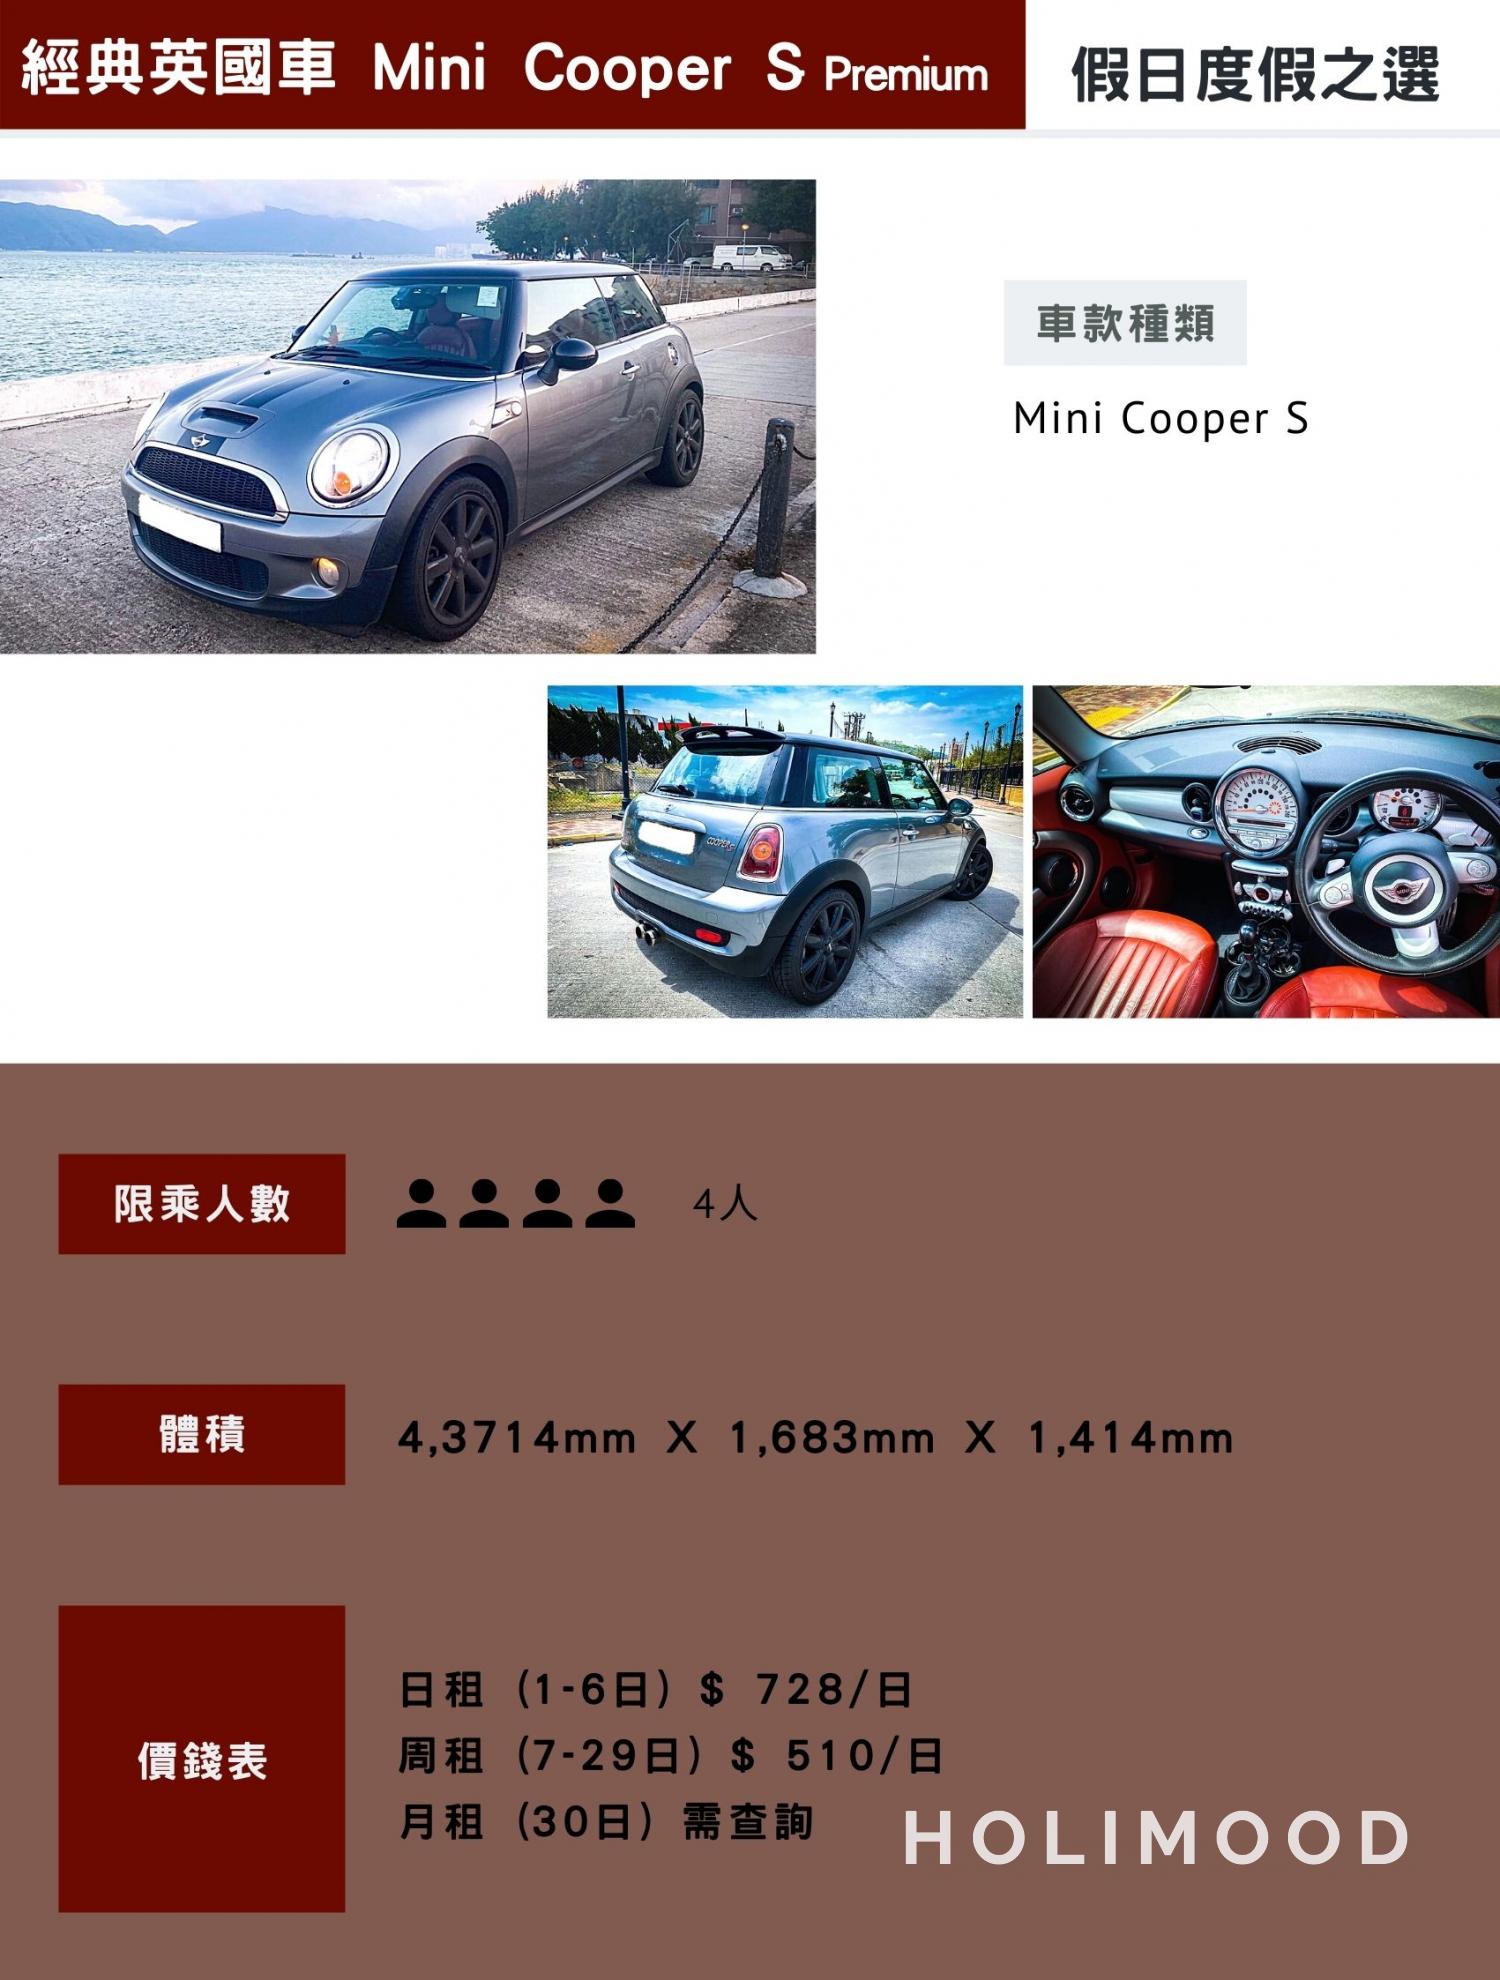 Mini Copper S - Special Collection  假日度假之選 （日租）